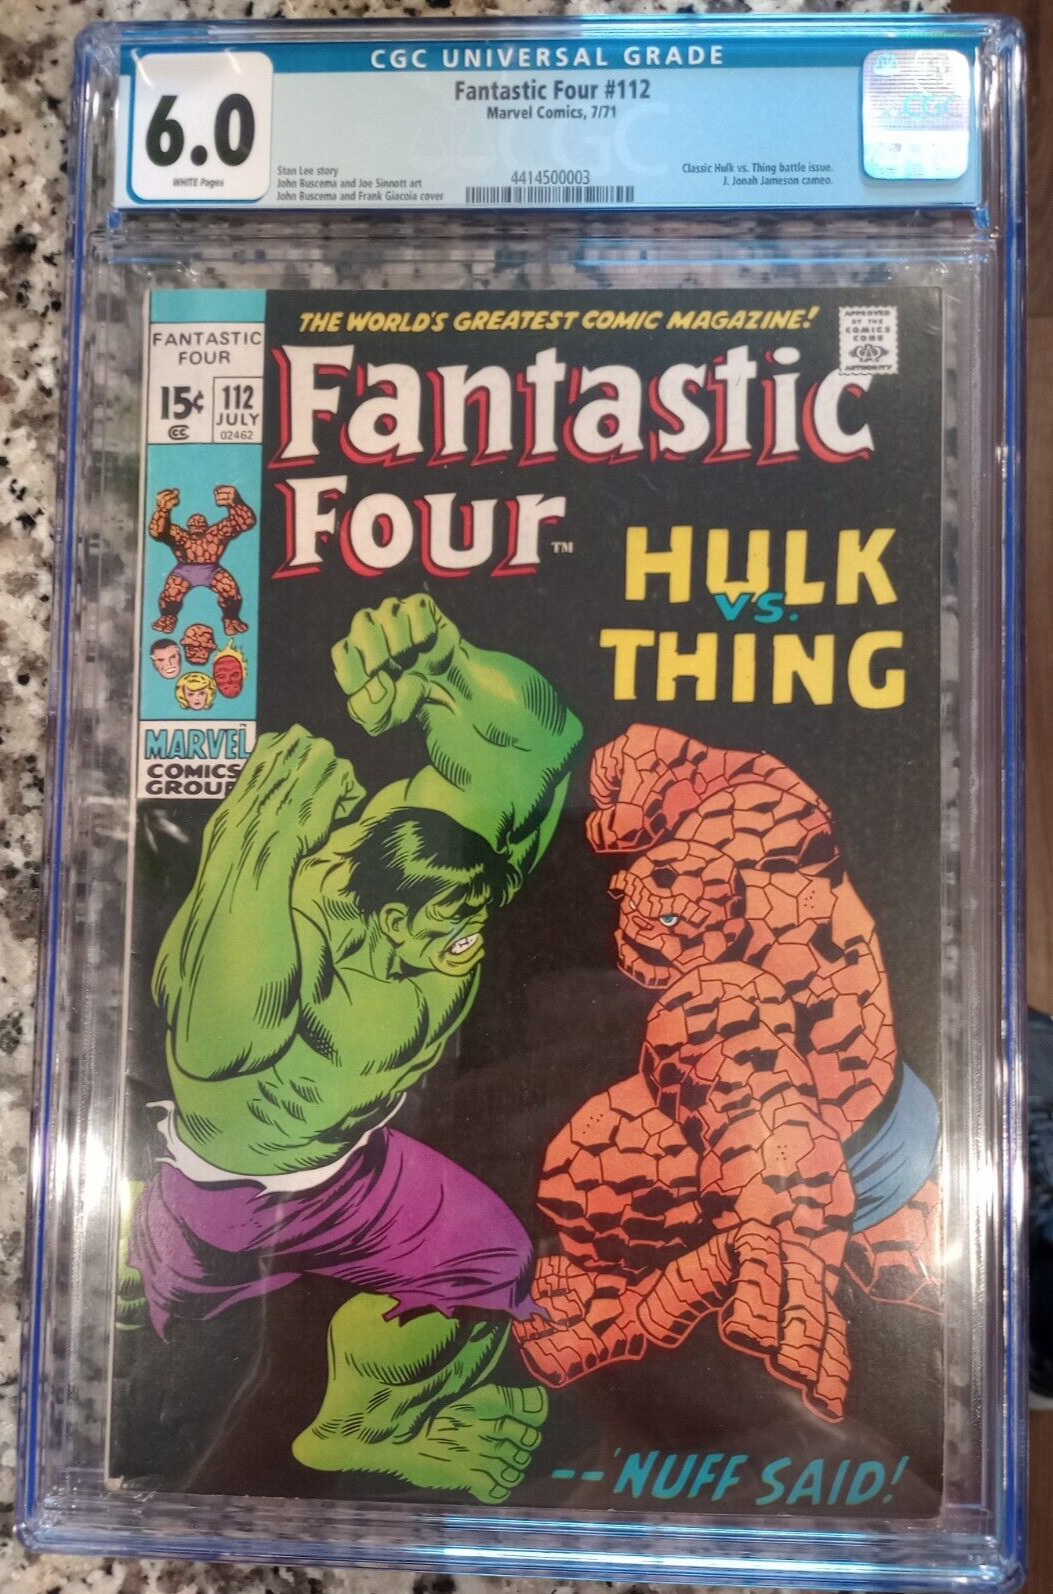 FANTASTIC FOUR #112 CGC 6.0 WHITE PAGES   CLASSIC HULK VS. THING BATTLE ISSUE